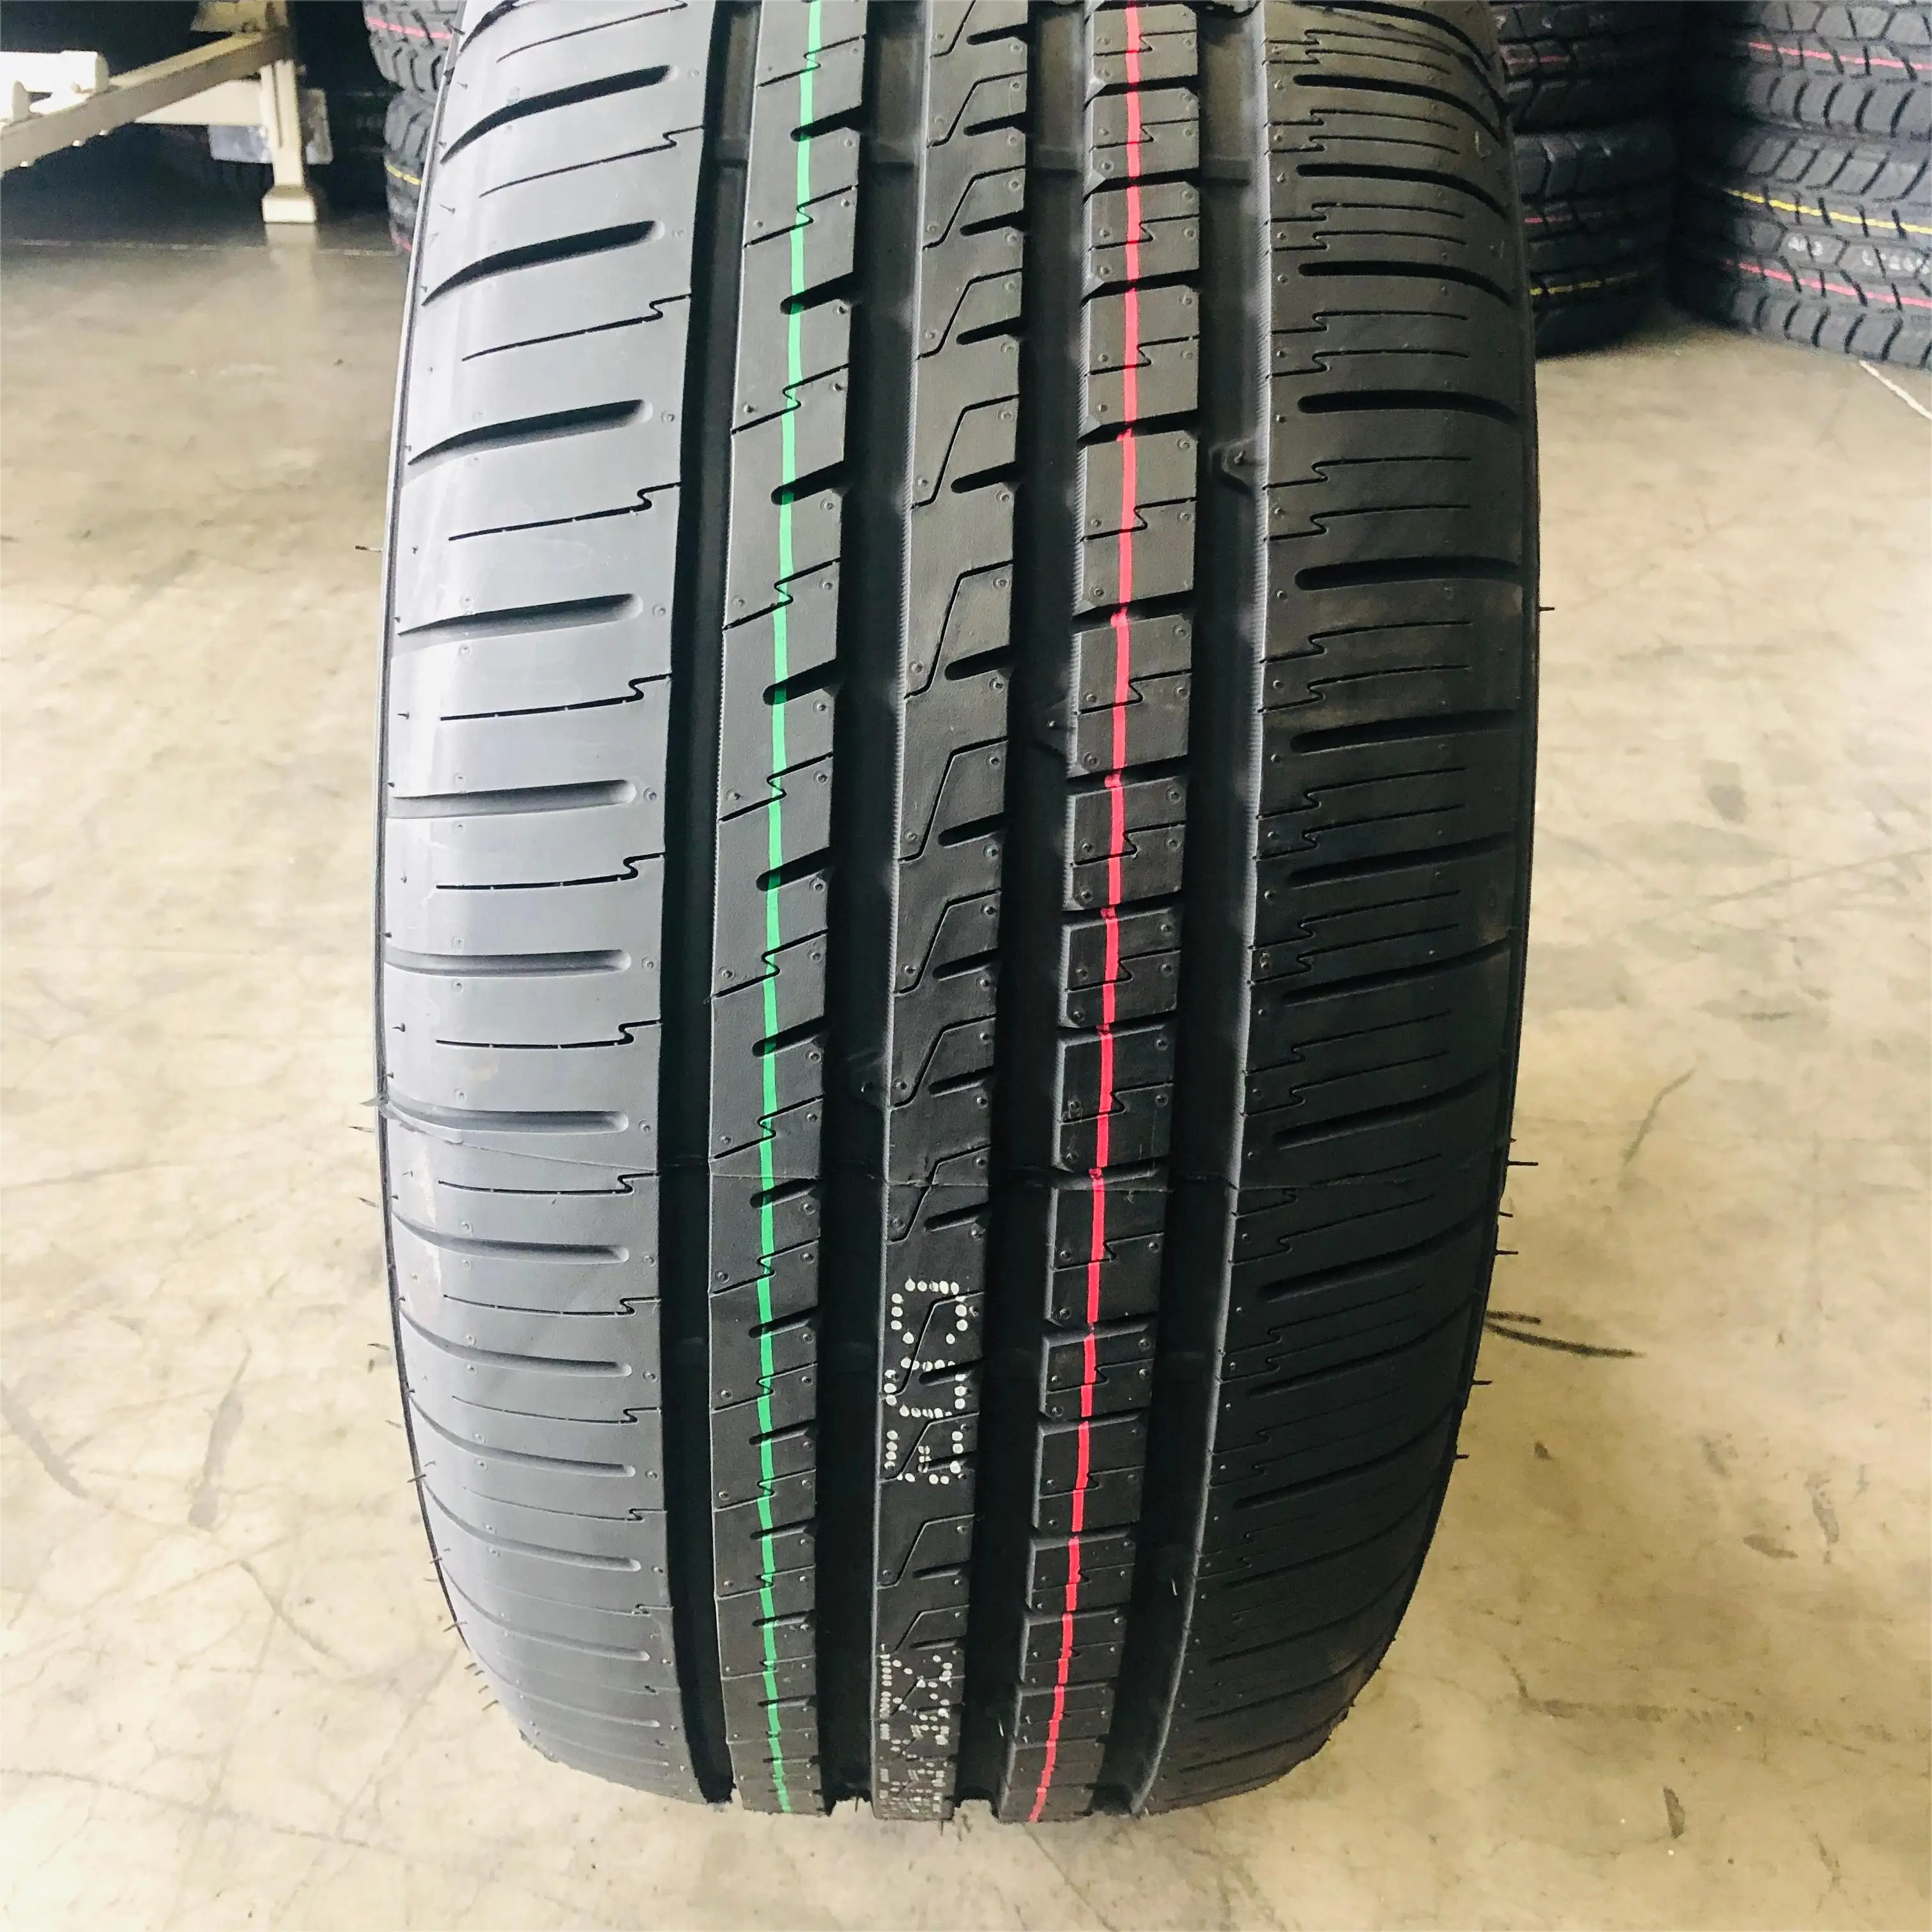 Ultra high performance225/55R17 235/55R17inch Radial Rubber Tubeless Airless Passenger Car Tire